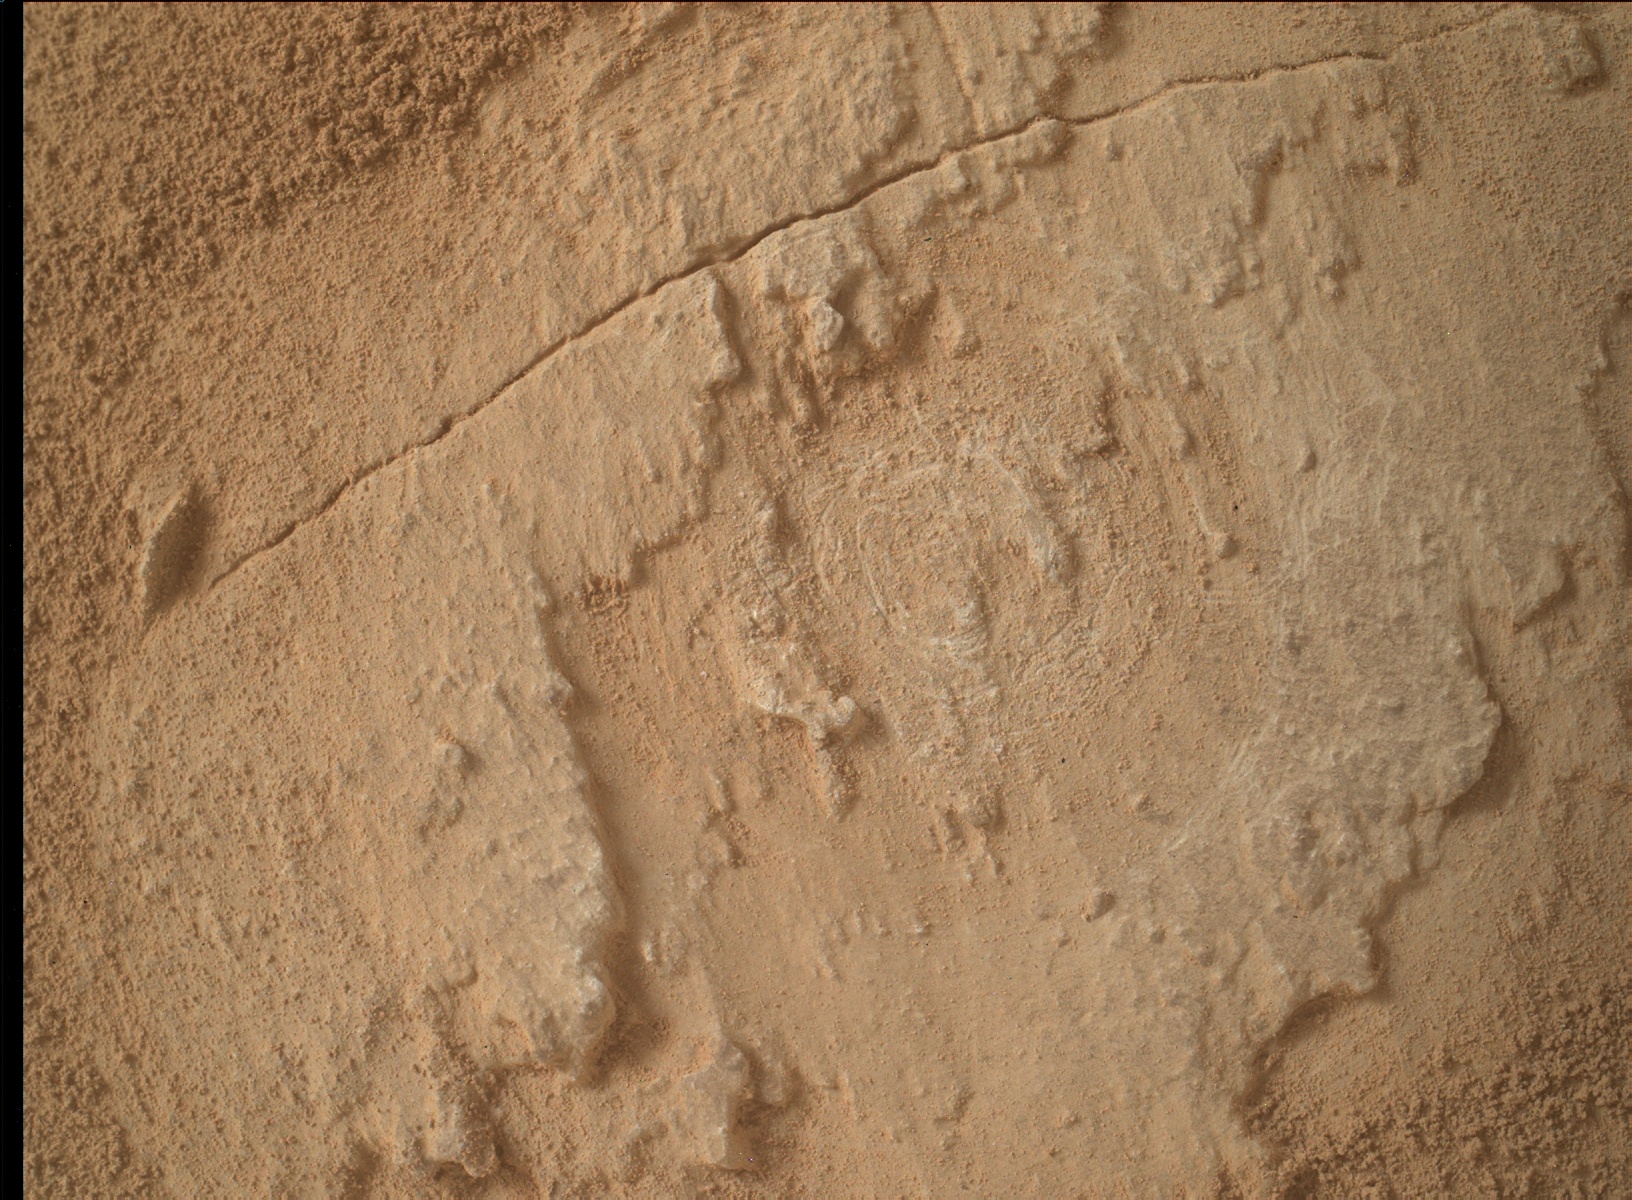 Nasa's Mars rover Curiosity acquired this image using its Mars Hand Lens Imager (MAHLI) on Sol 3807